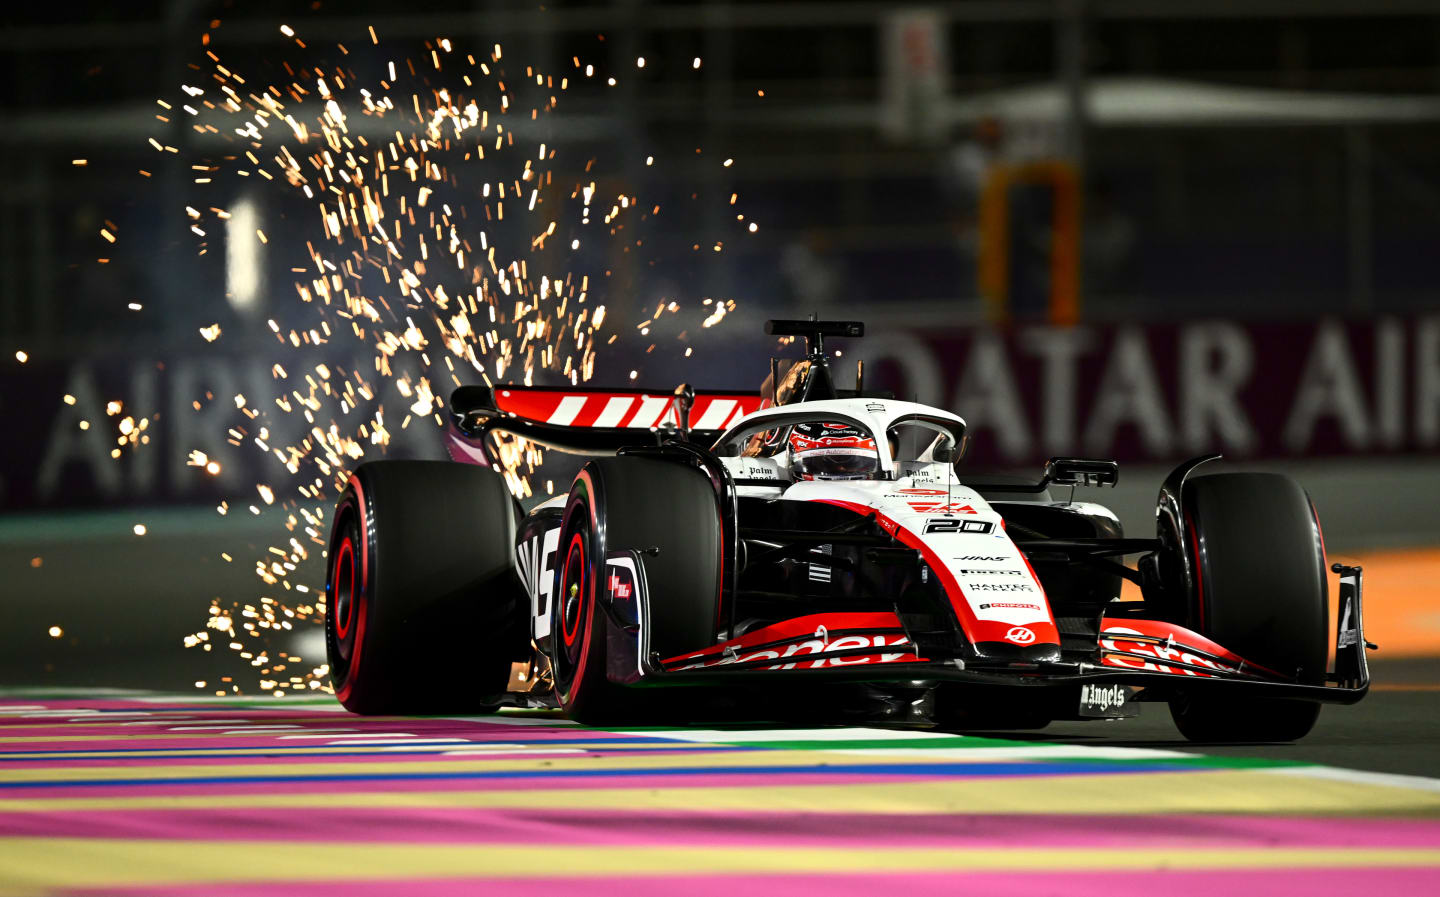 JEDDAH, SAUDI ARABIA - MARCH 18: Sparks fly behind Kevin Magnussen of Denmark driving the (20) Haas F1 VF-23 Ferrari during qualifying ahead of the F1 Grand Prix of Saudi Arabia at Jeddah Corniche Circuit on March 18, 2023 in Jeddah, Saudi Arabia. (Photo by Clive Mason/Getty Images)